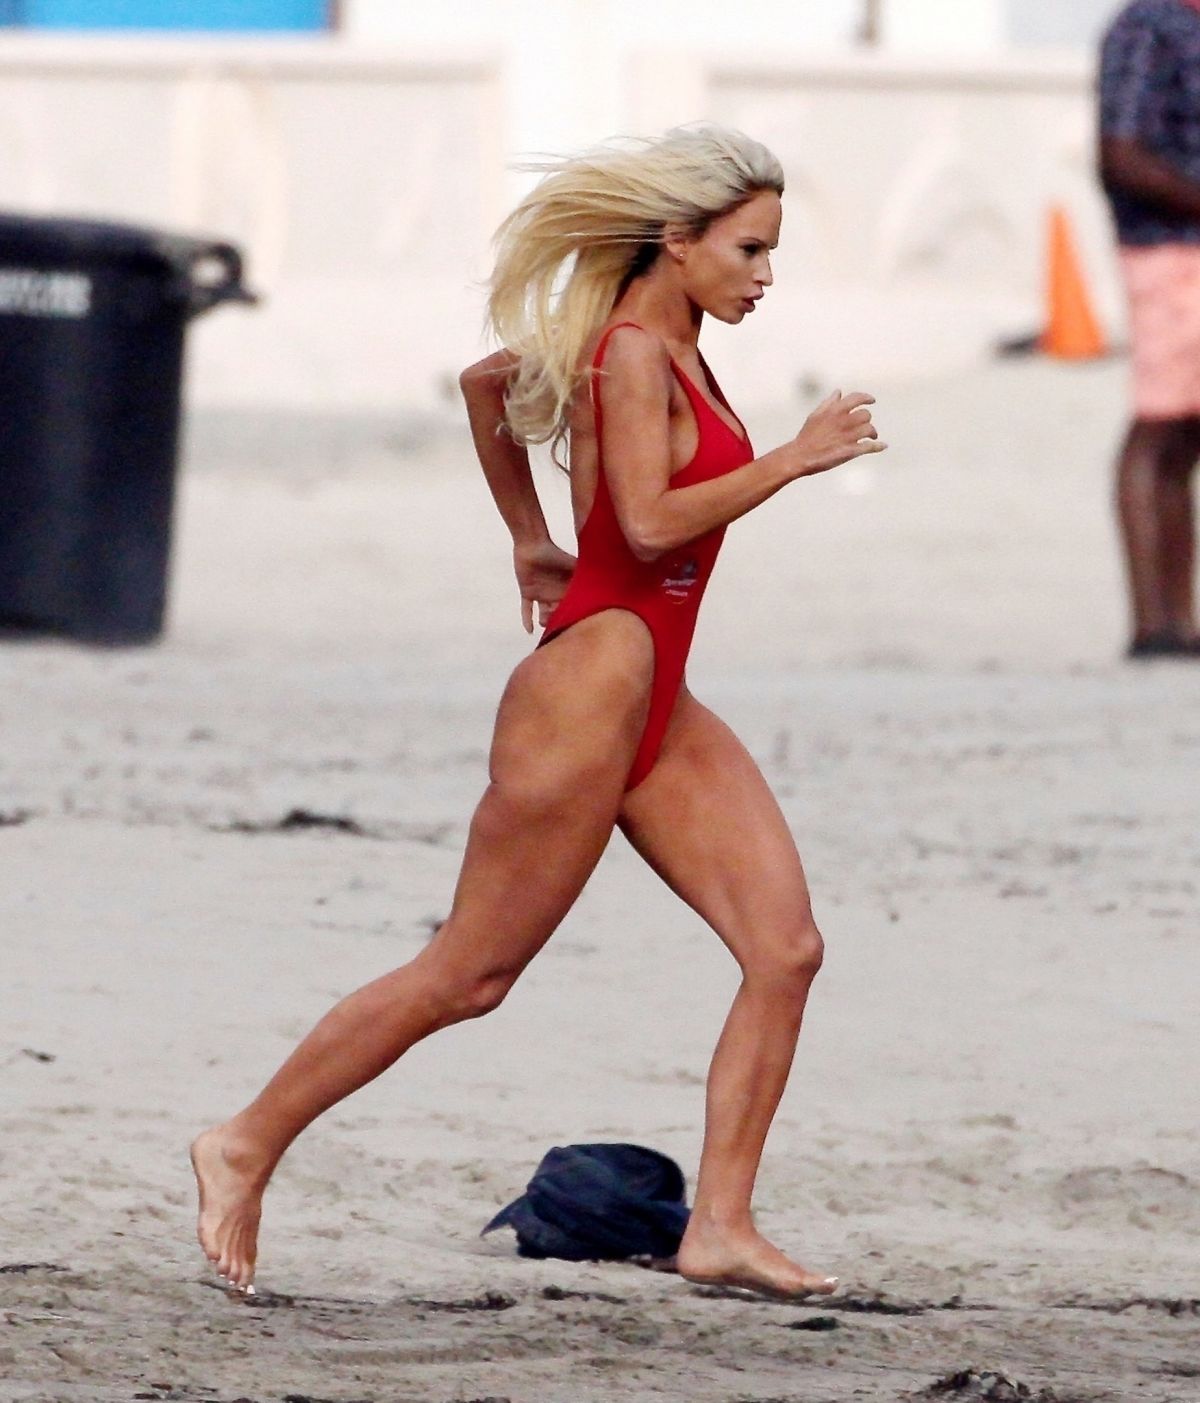 LILY JAMES In Swimsuit As Pam Anderson On The Set Of Pam And Tommy At A Beach In Malibu